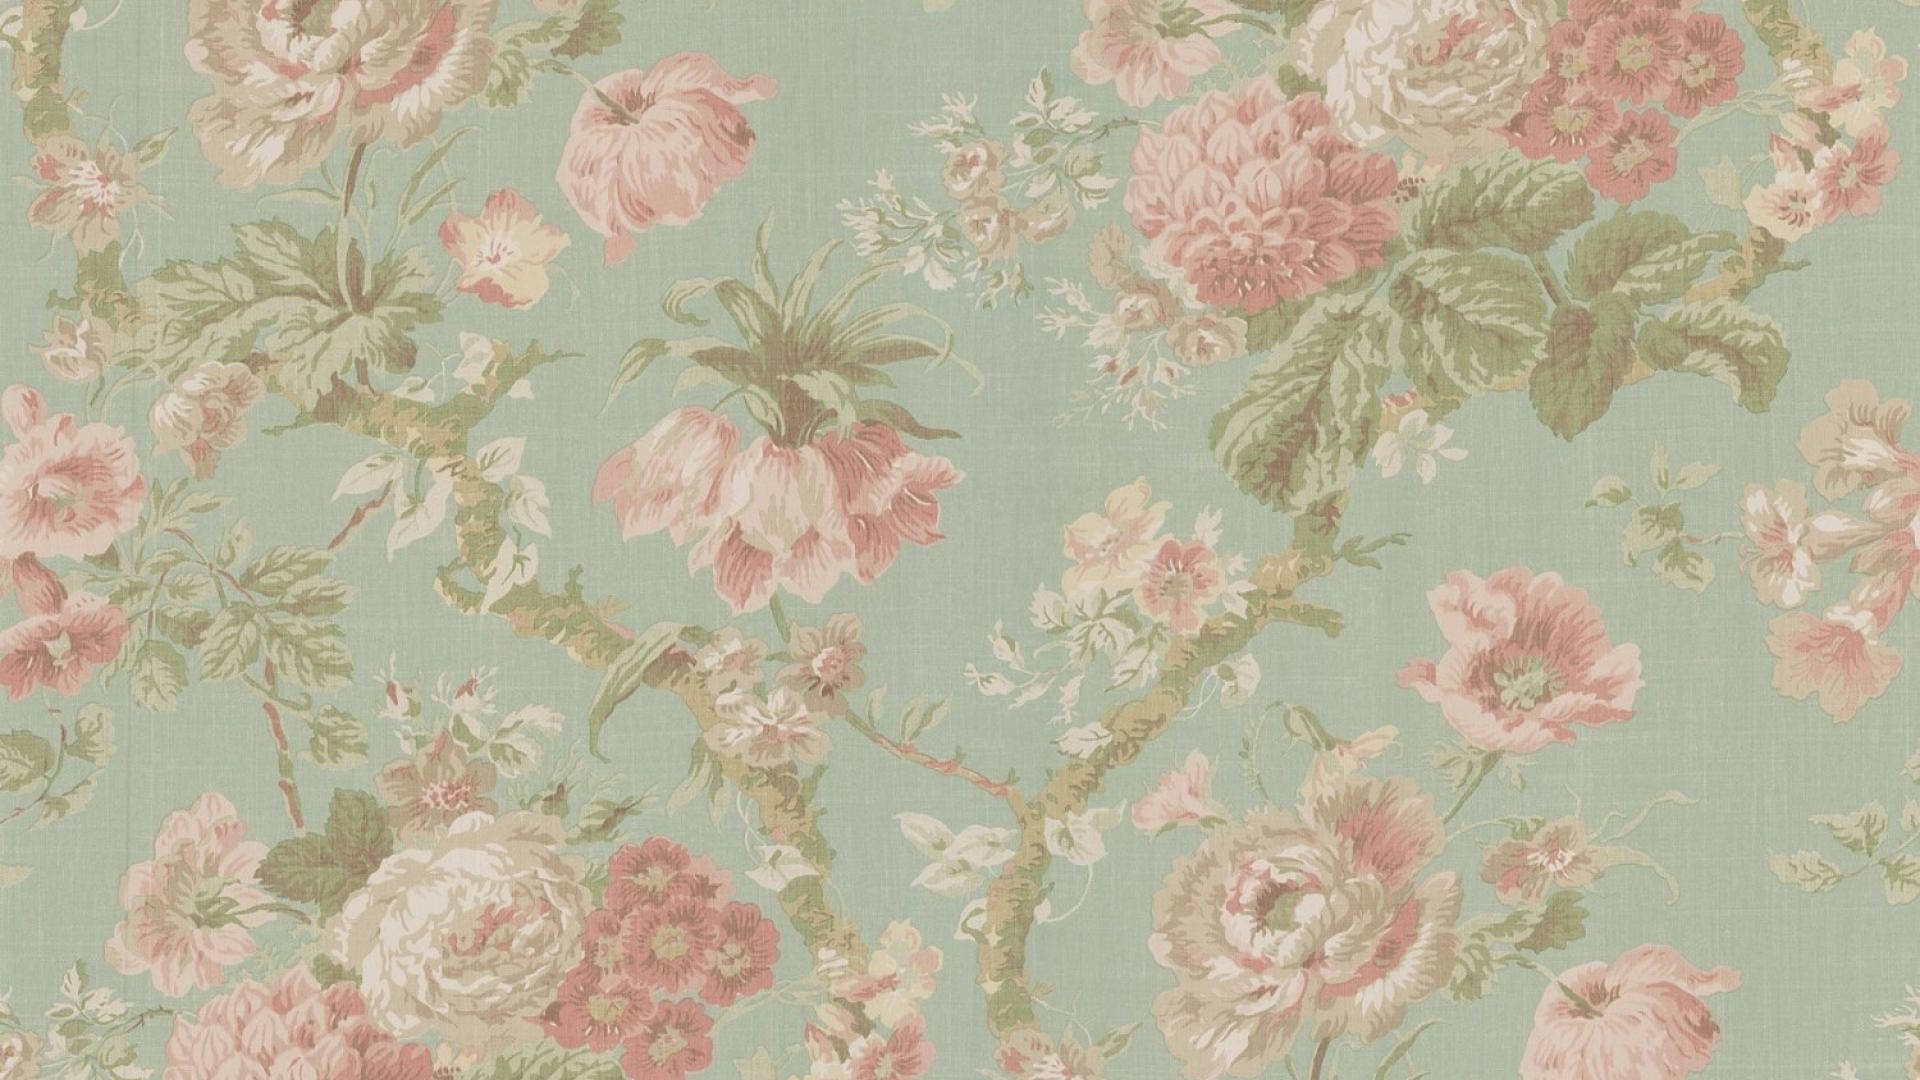 A floral wallpaper with pink and green flowers - Coquette